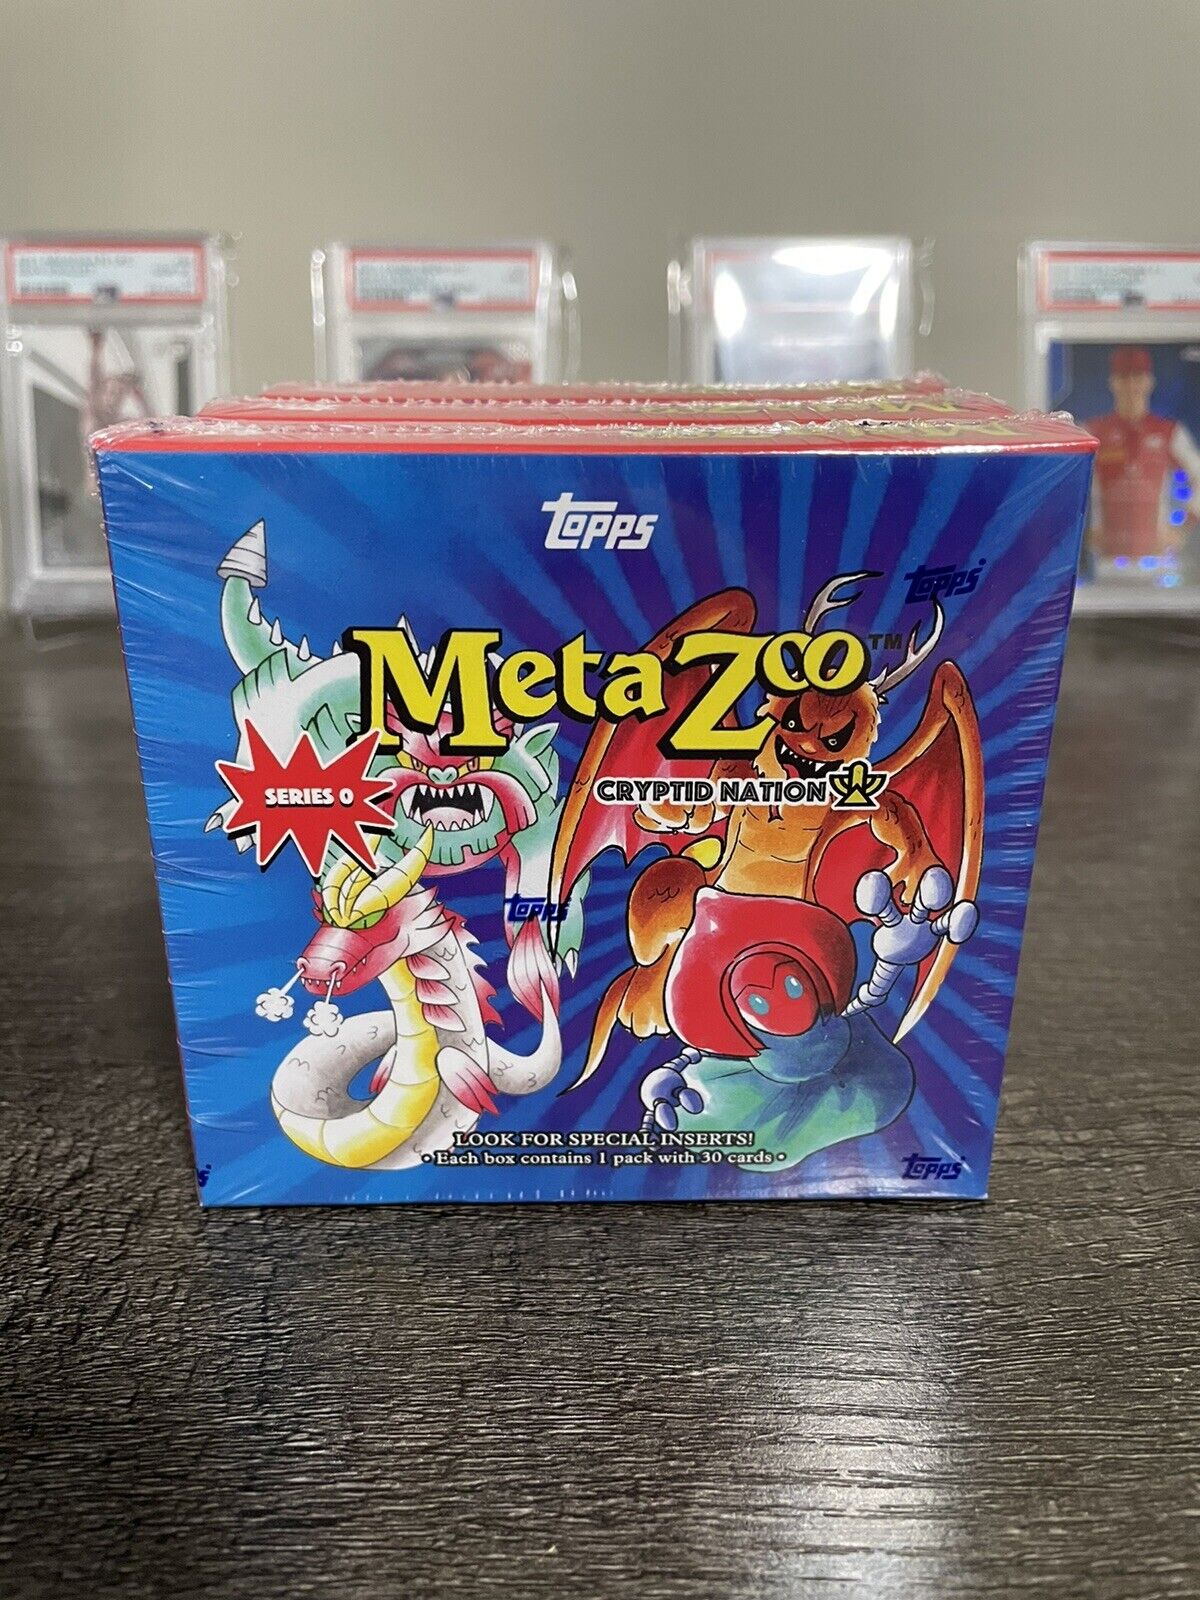 2021 NEW Topps MetaZoo Cryptid Nation Series 0 30 Card Pack IN HAND FAST SHIP